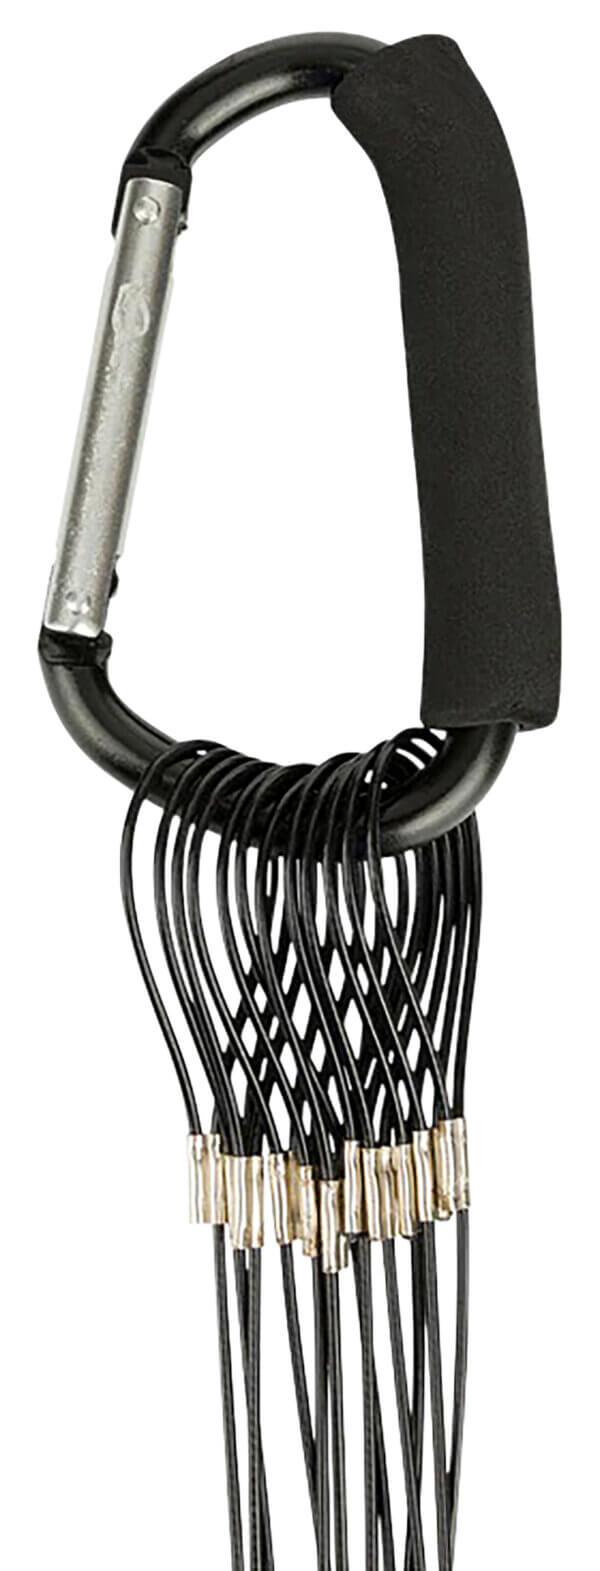 Drake Waterfowl DA9000048004 Texas Rig Package Set 48″ Black Coated Steel Wire 4 oz Lead Weight Metal Cable Crimps Includes Carabiner (12 Pack)